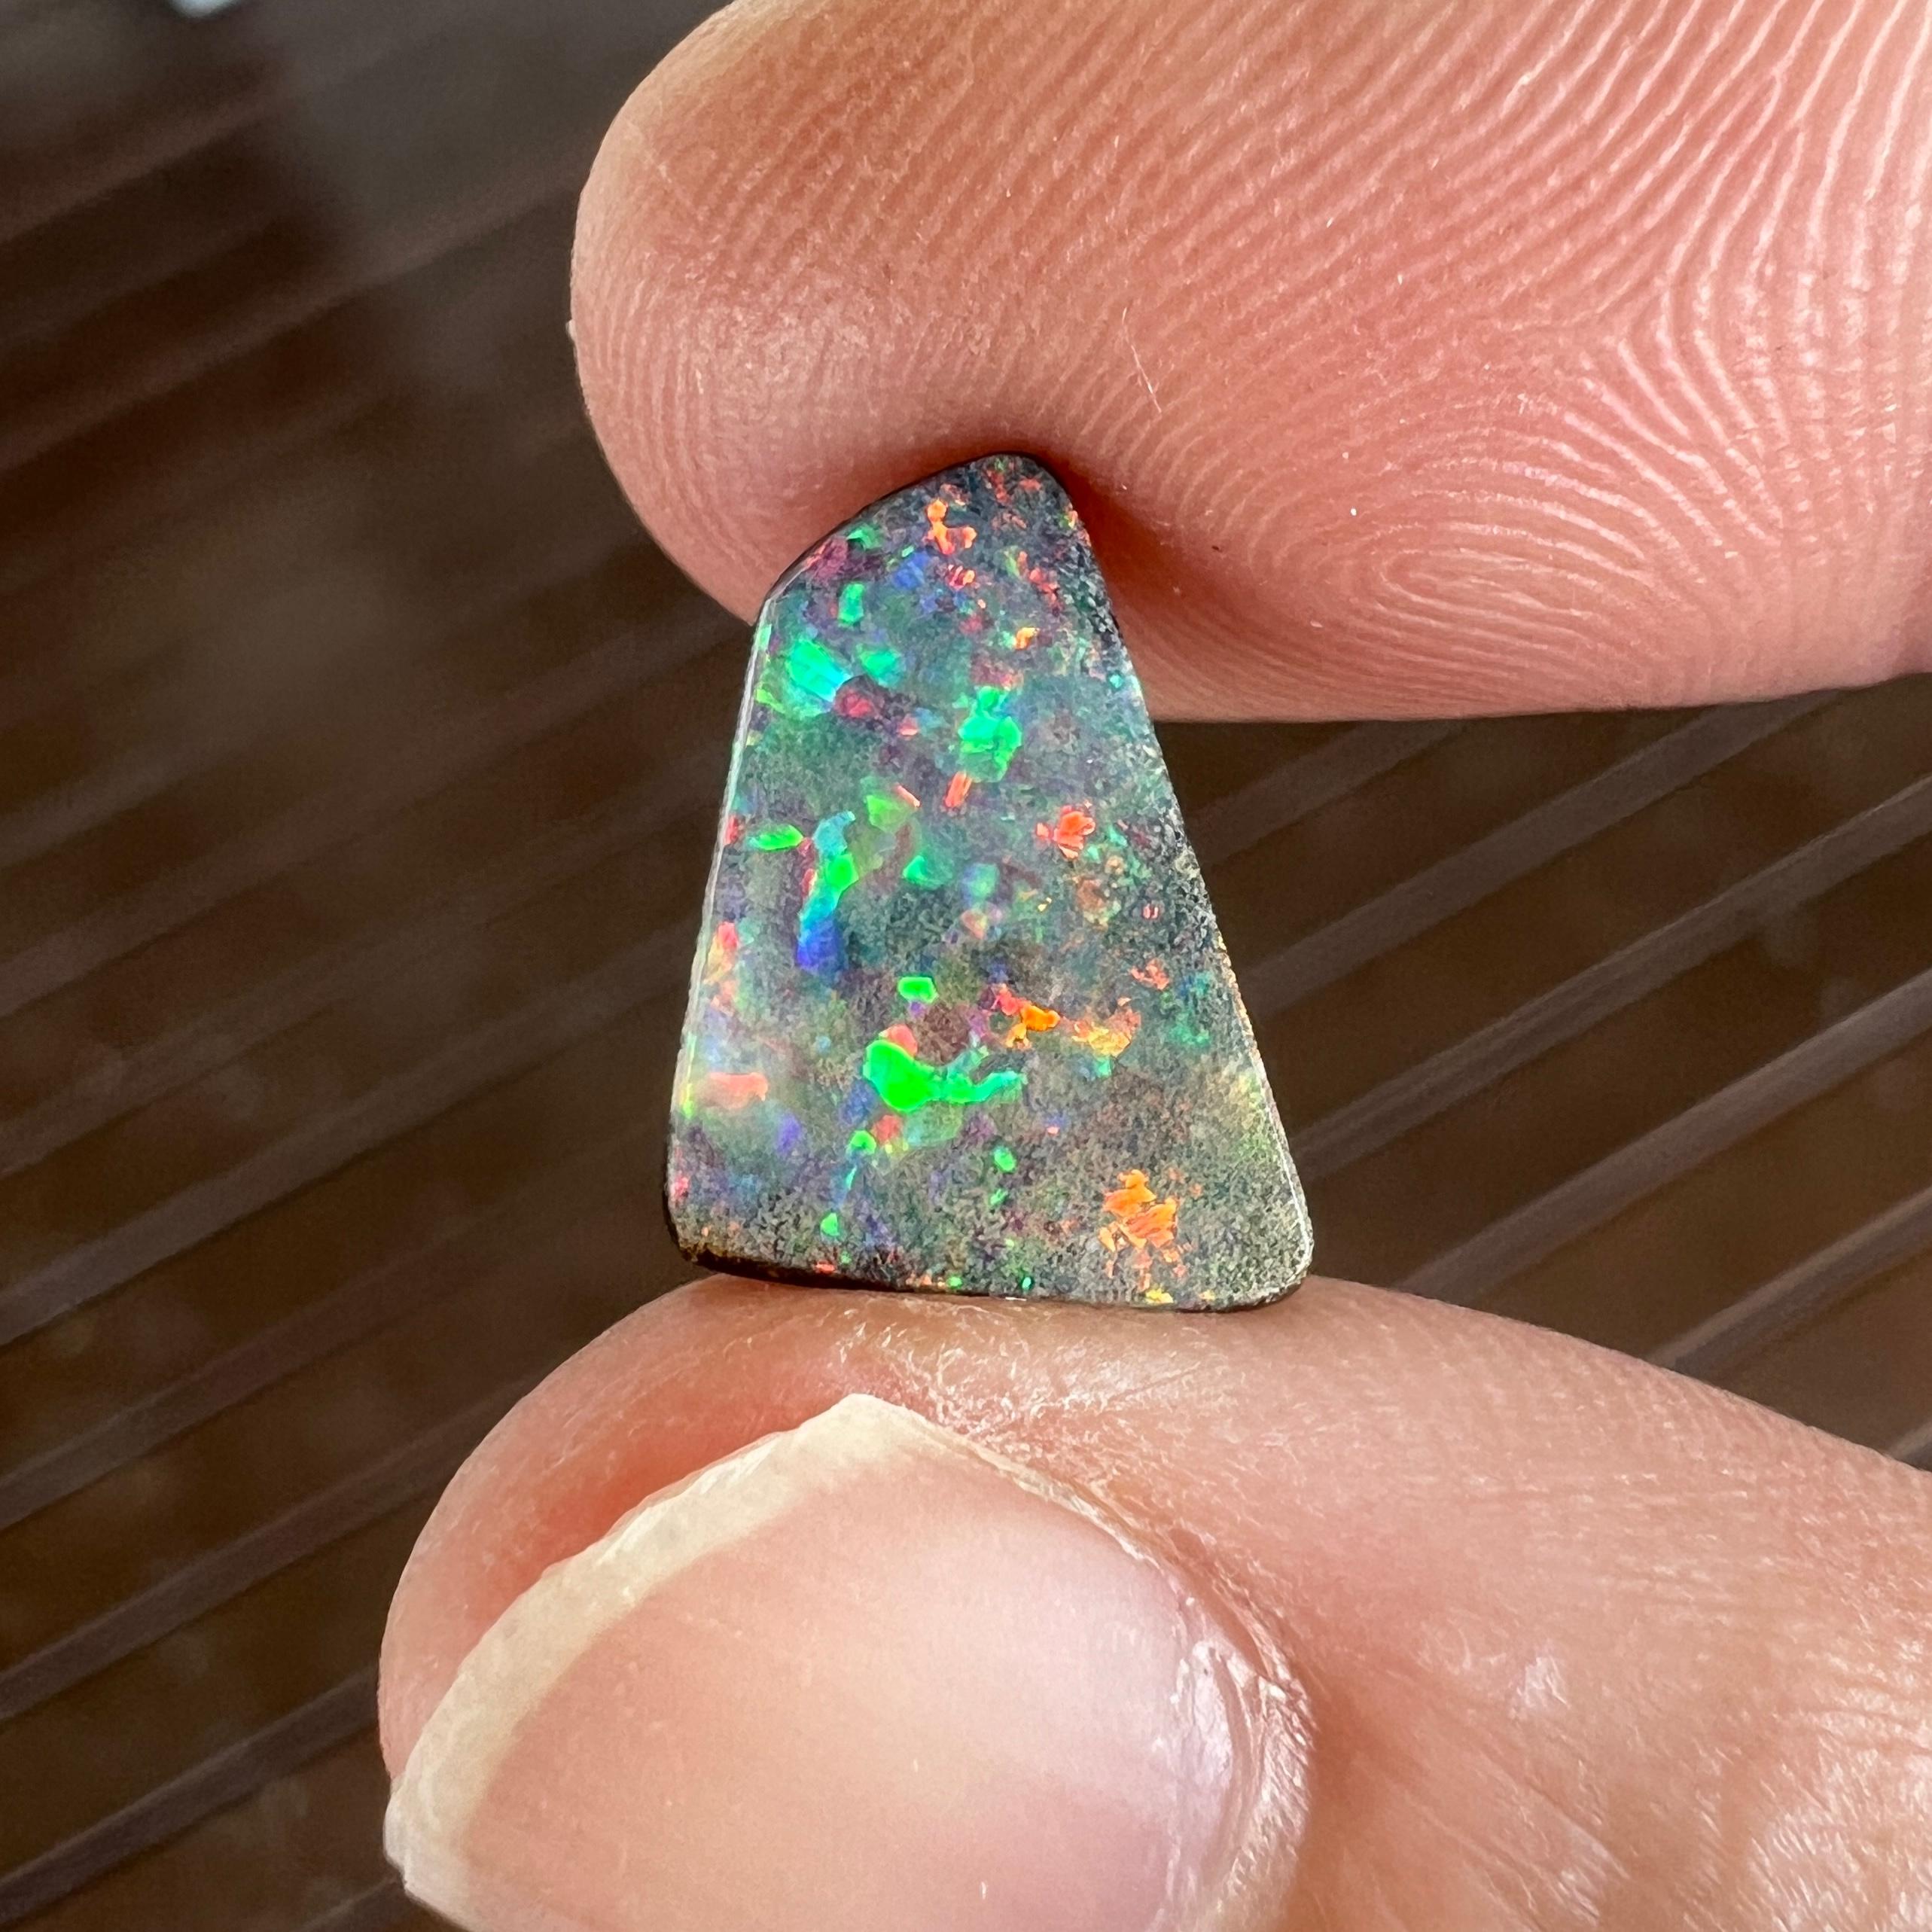 This lovely 3.53 Ct Australian boulder opal was mined by Sue Cooper at her Yaraka opal mine in western Queensland, Australia in 2022. Sue processed the rough opal herself and cut into into a free-form shape. 

We love both the pattern and movement